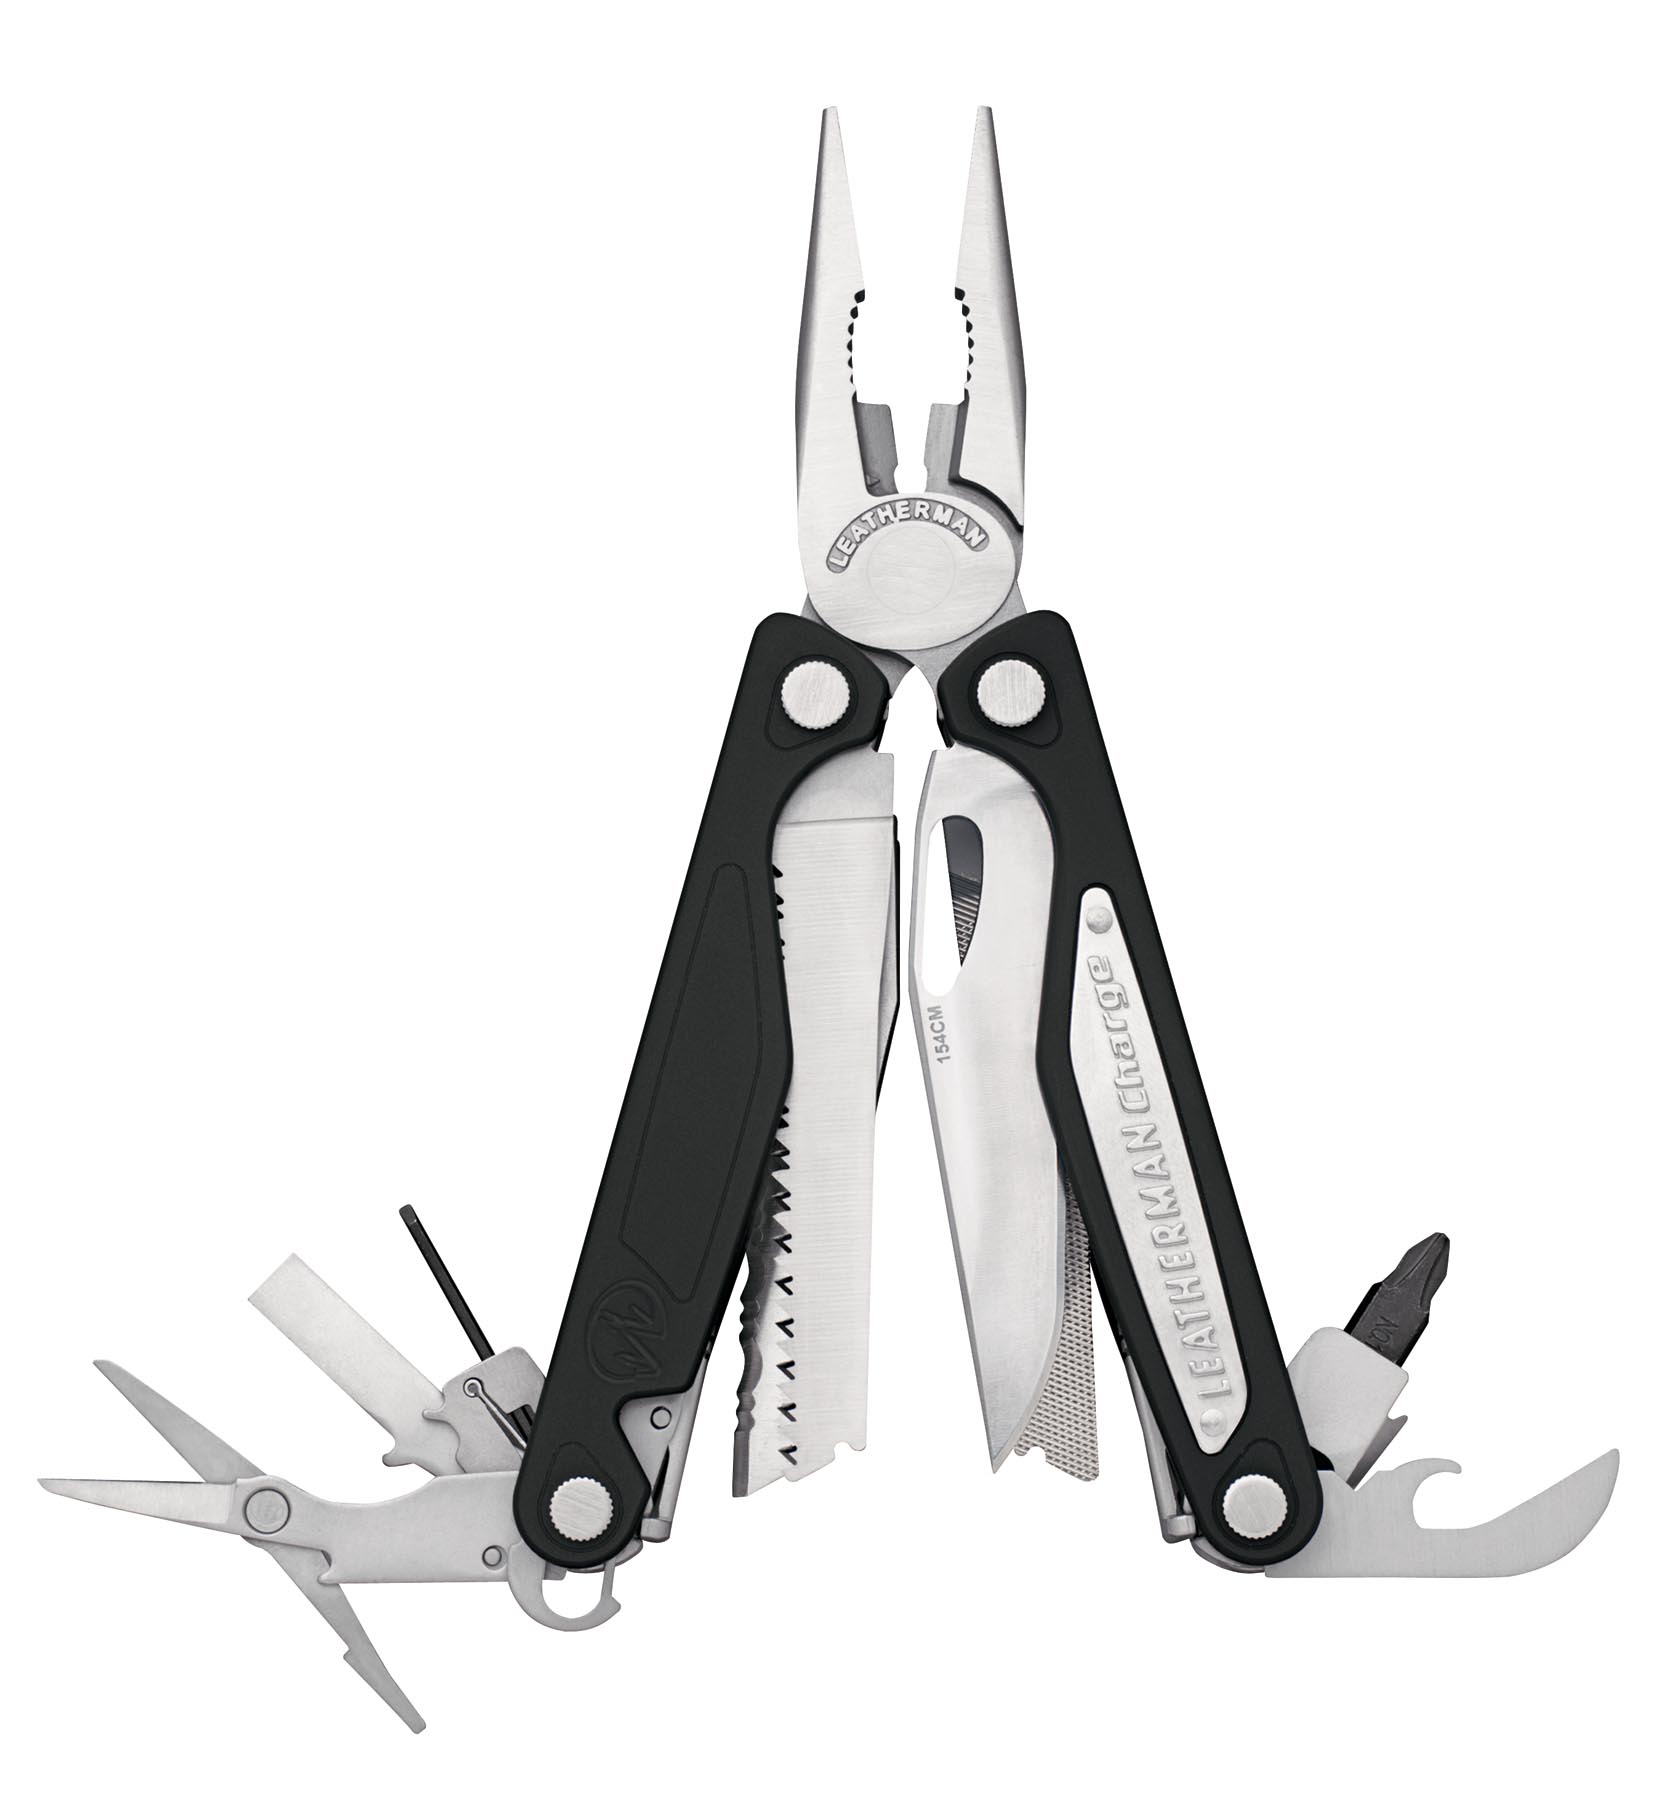 Leatherman Charge open